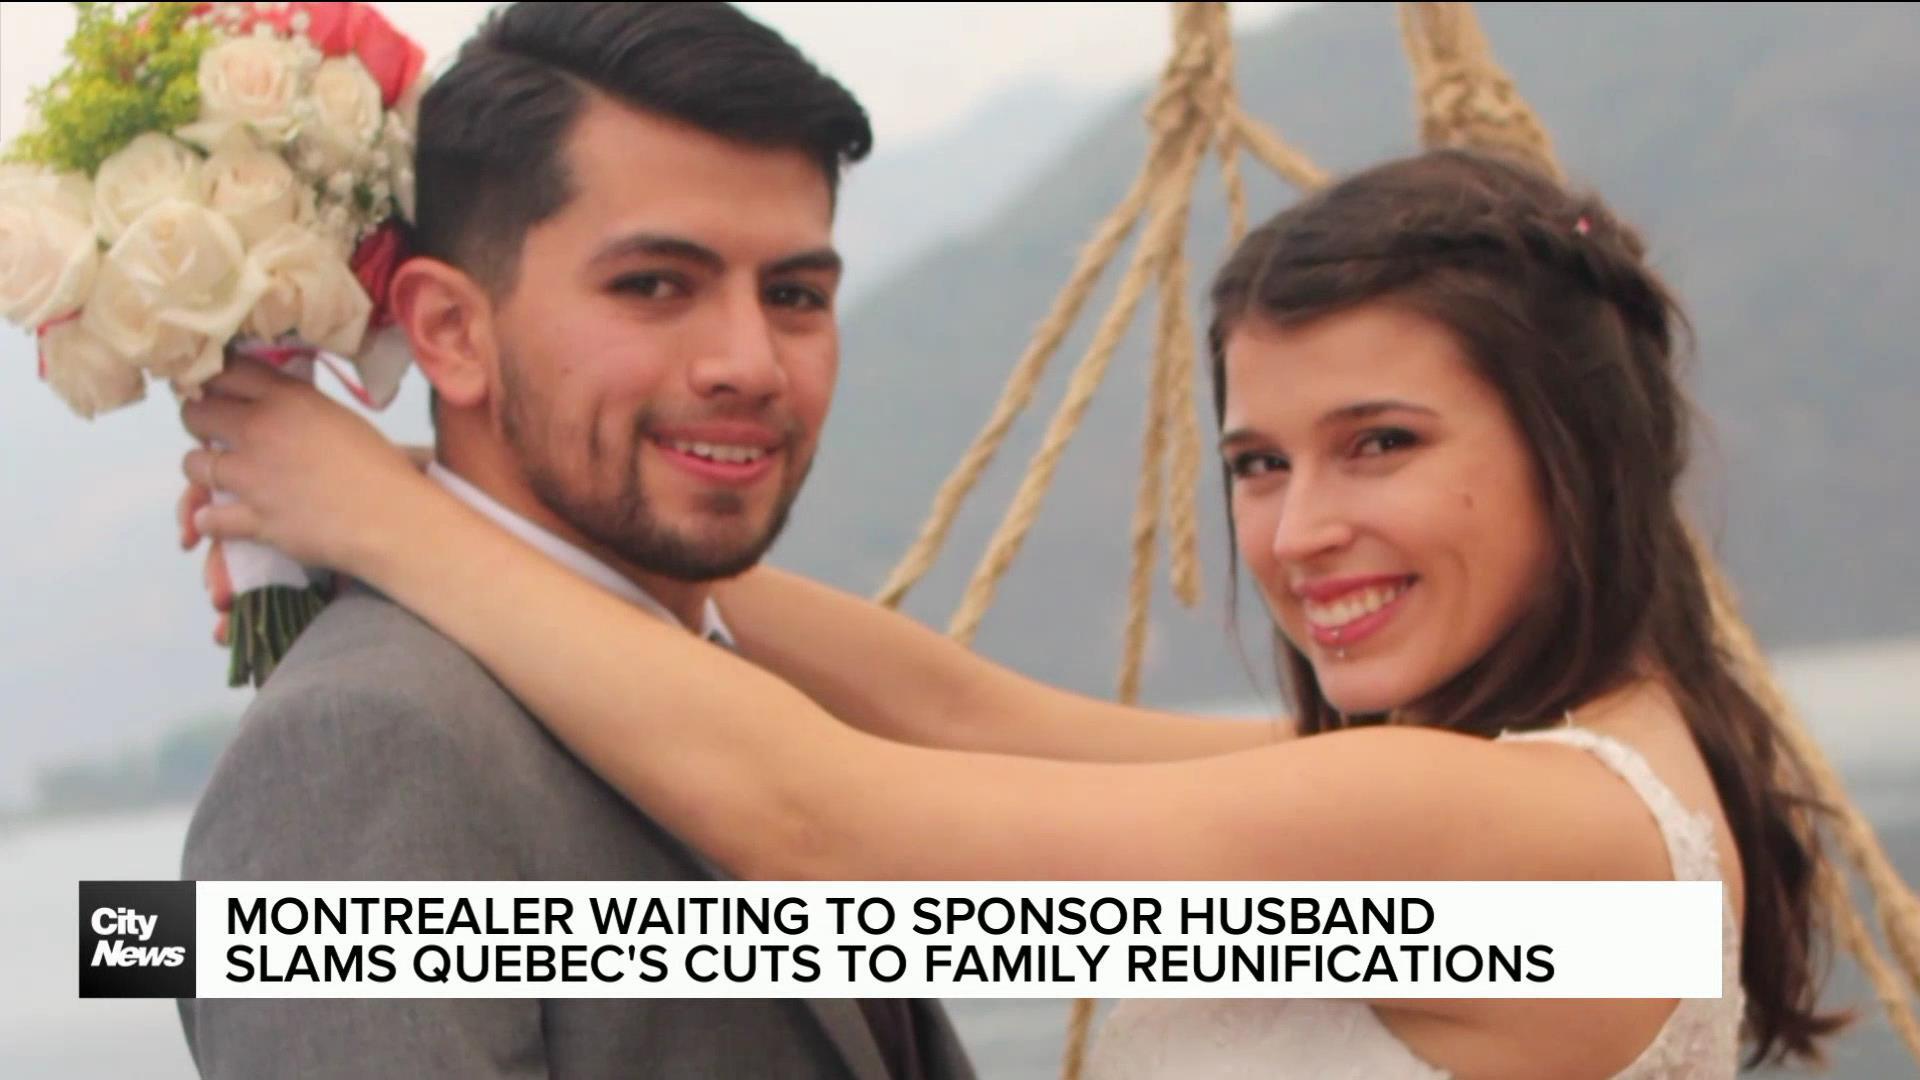 Concerns over Quebec's cuts to family reunification applications